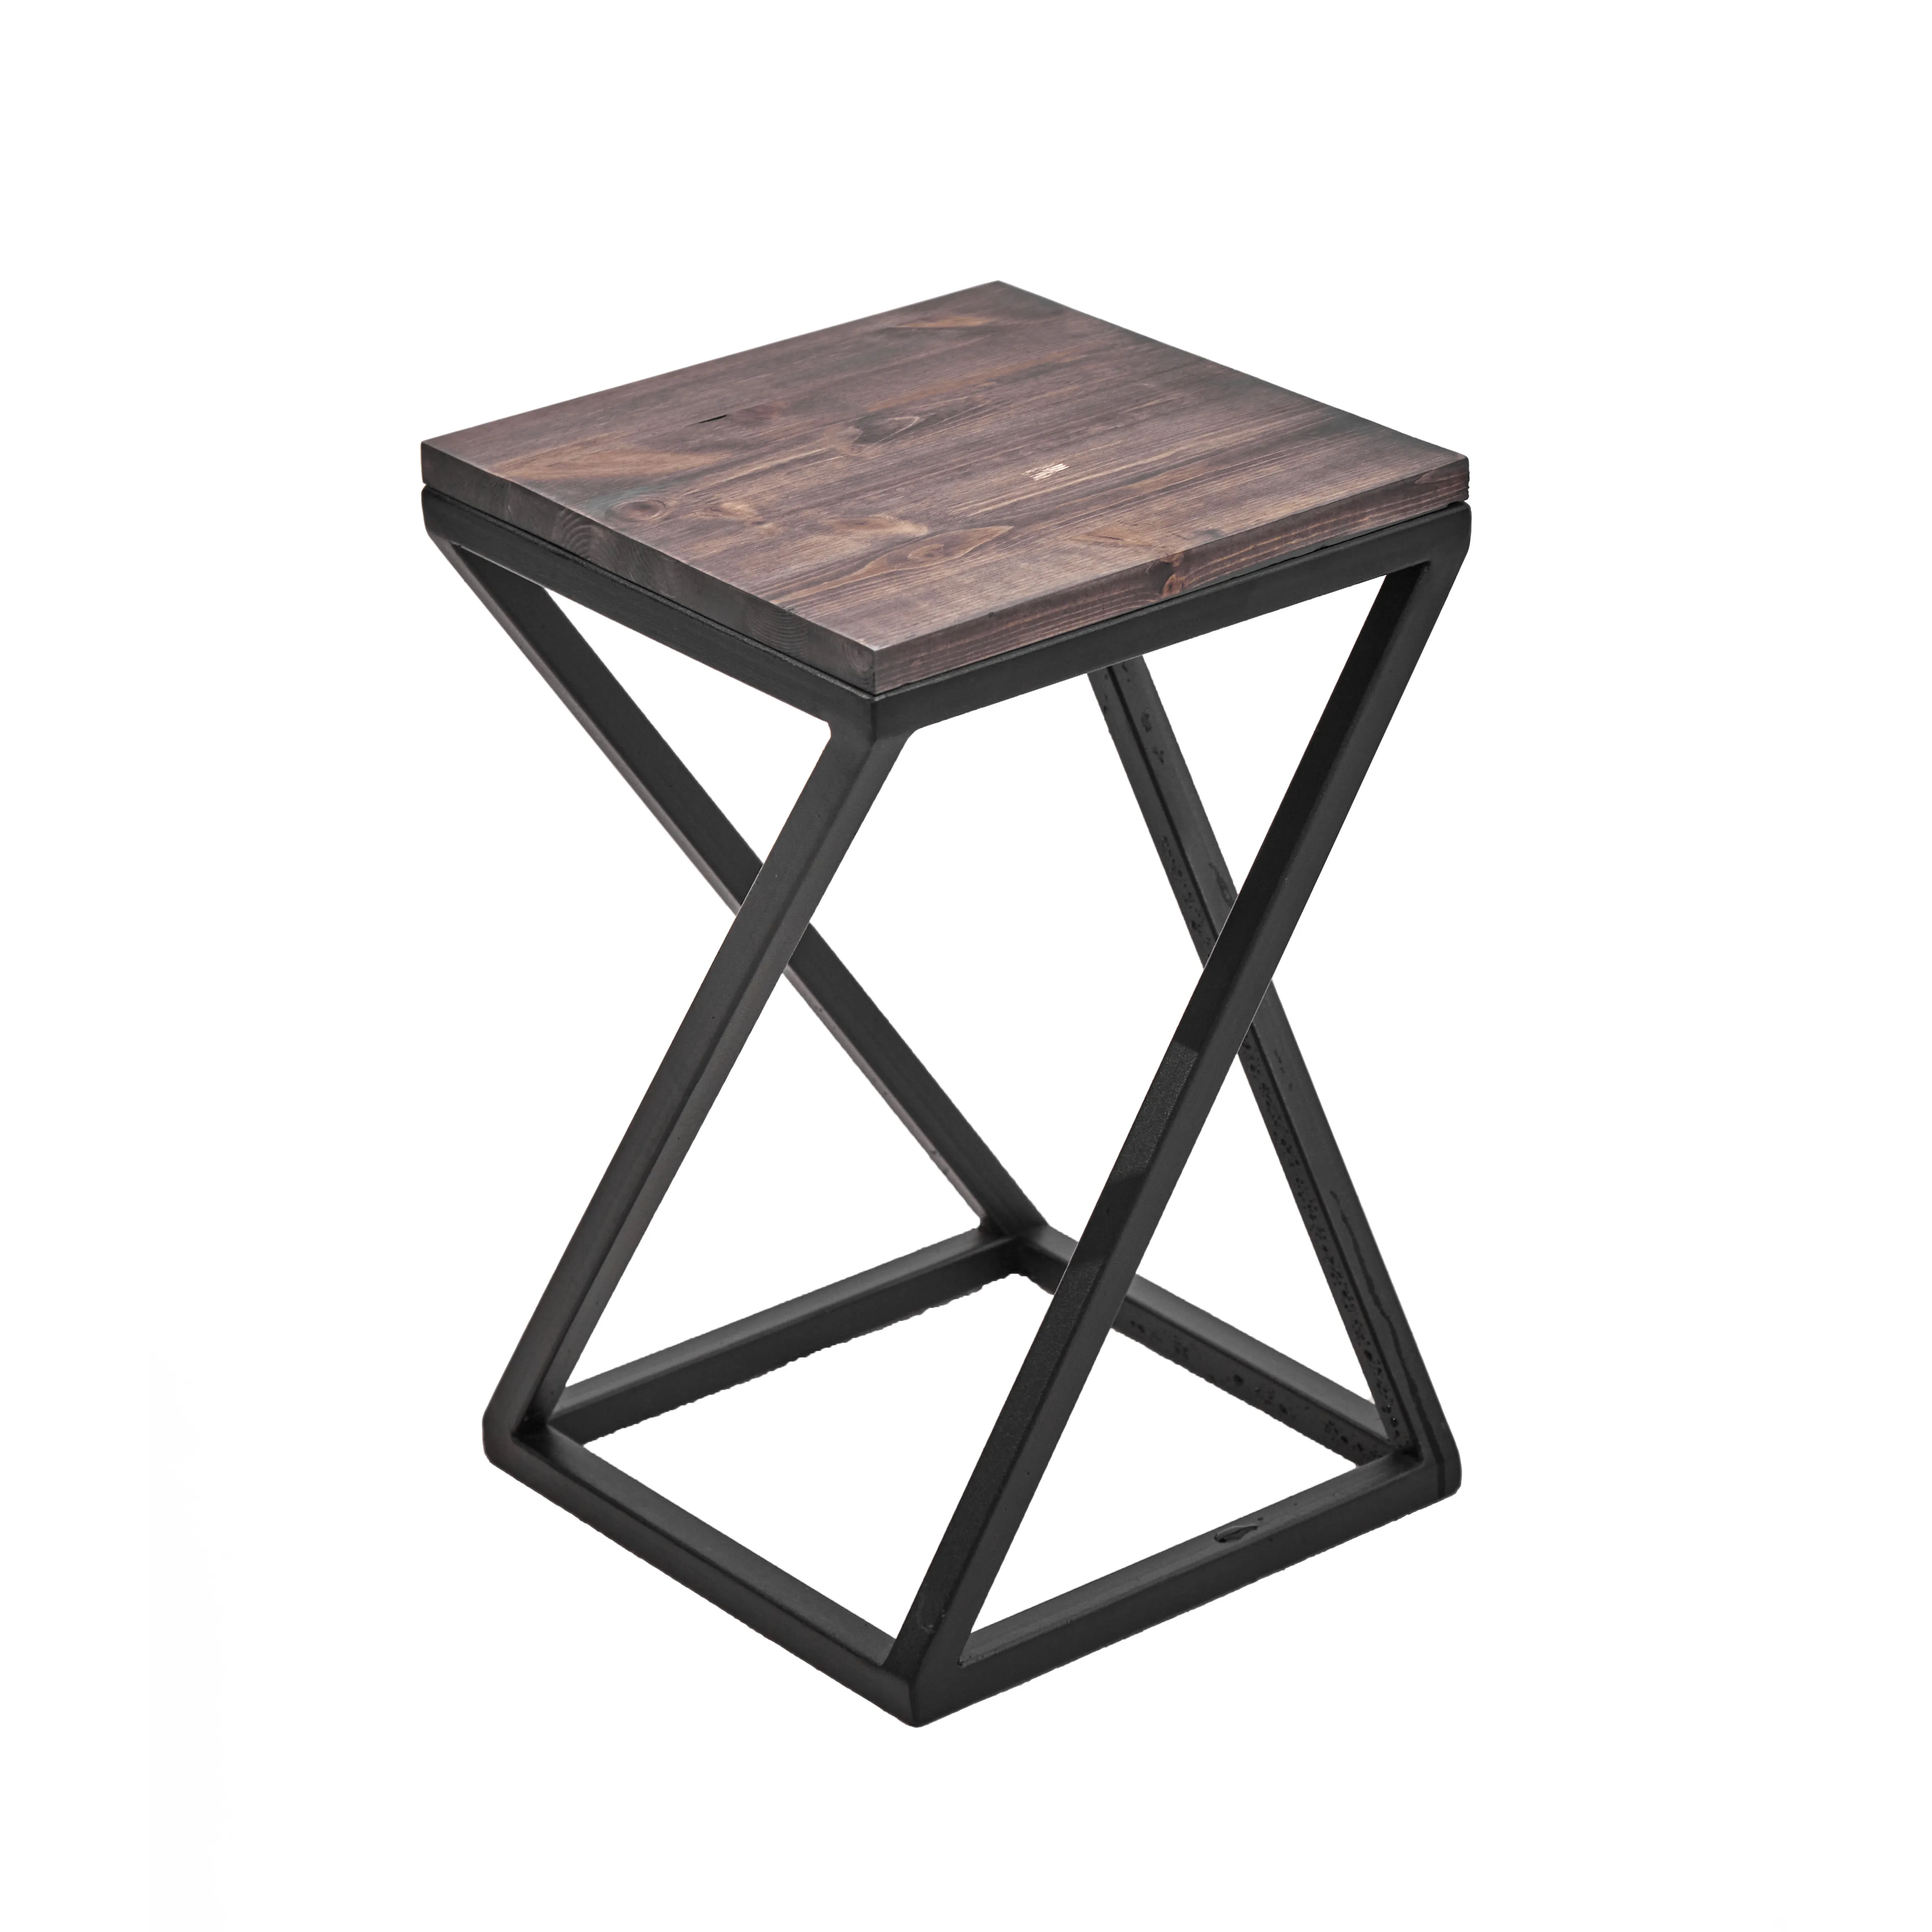 Custom design chair "Medium" modern wooden stool simple small home furniture for dining room and kitchen